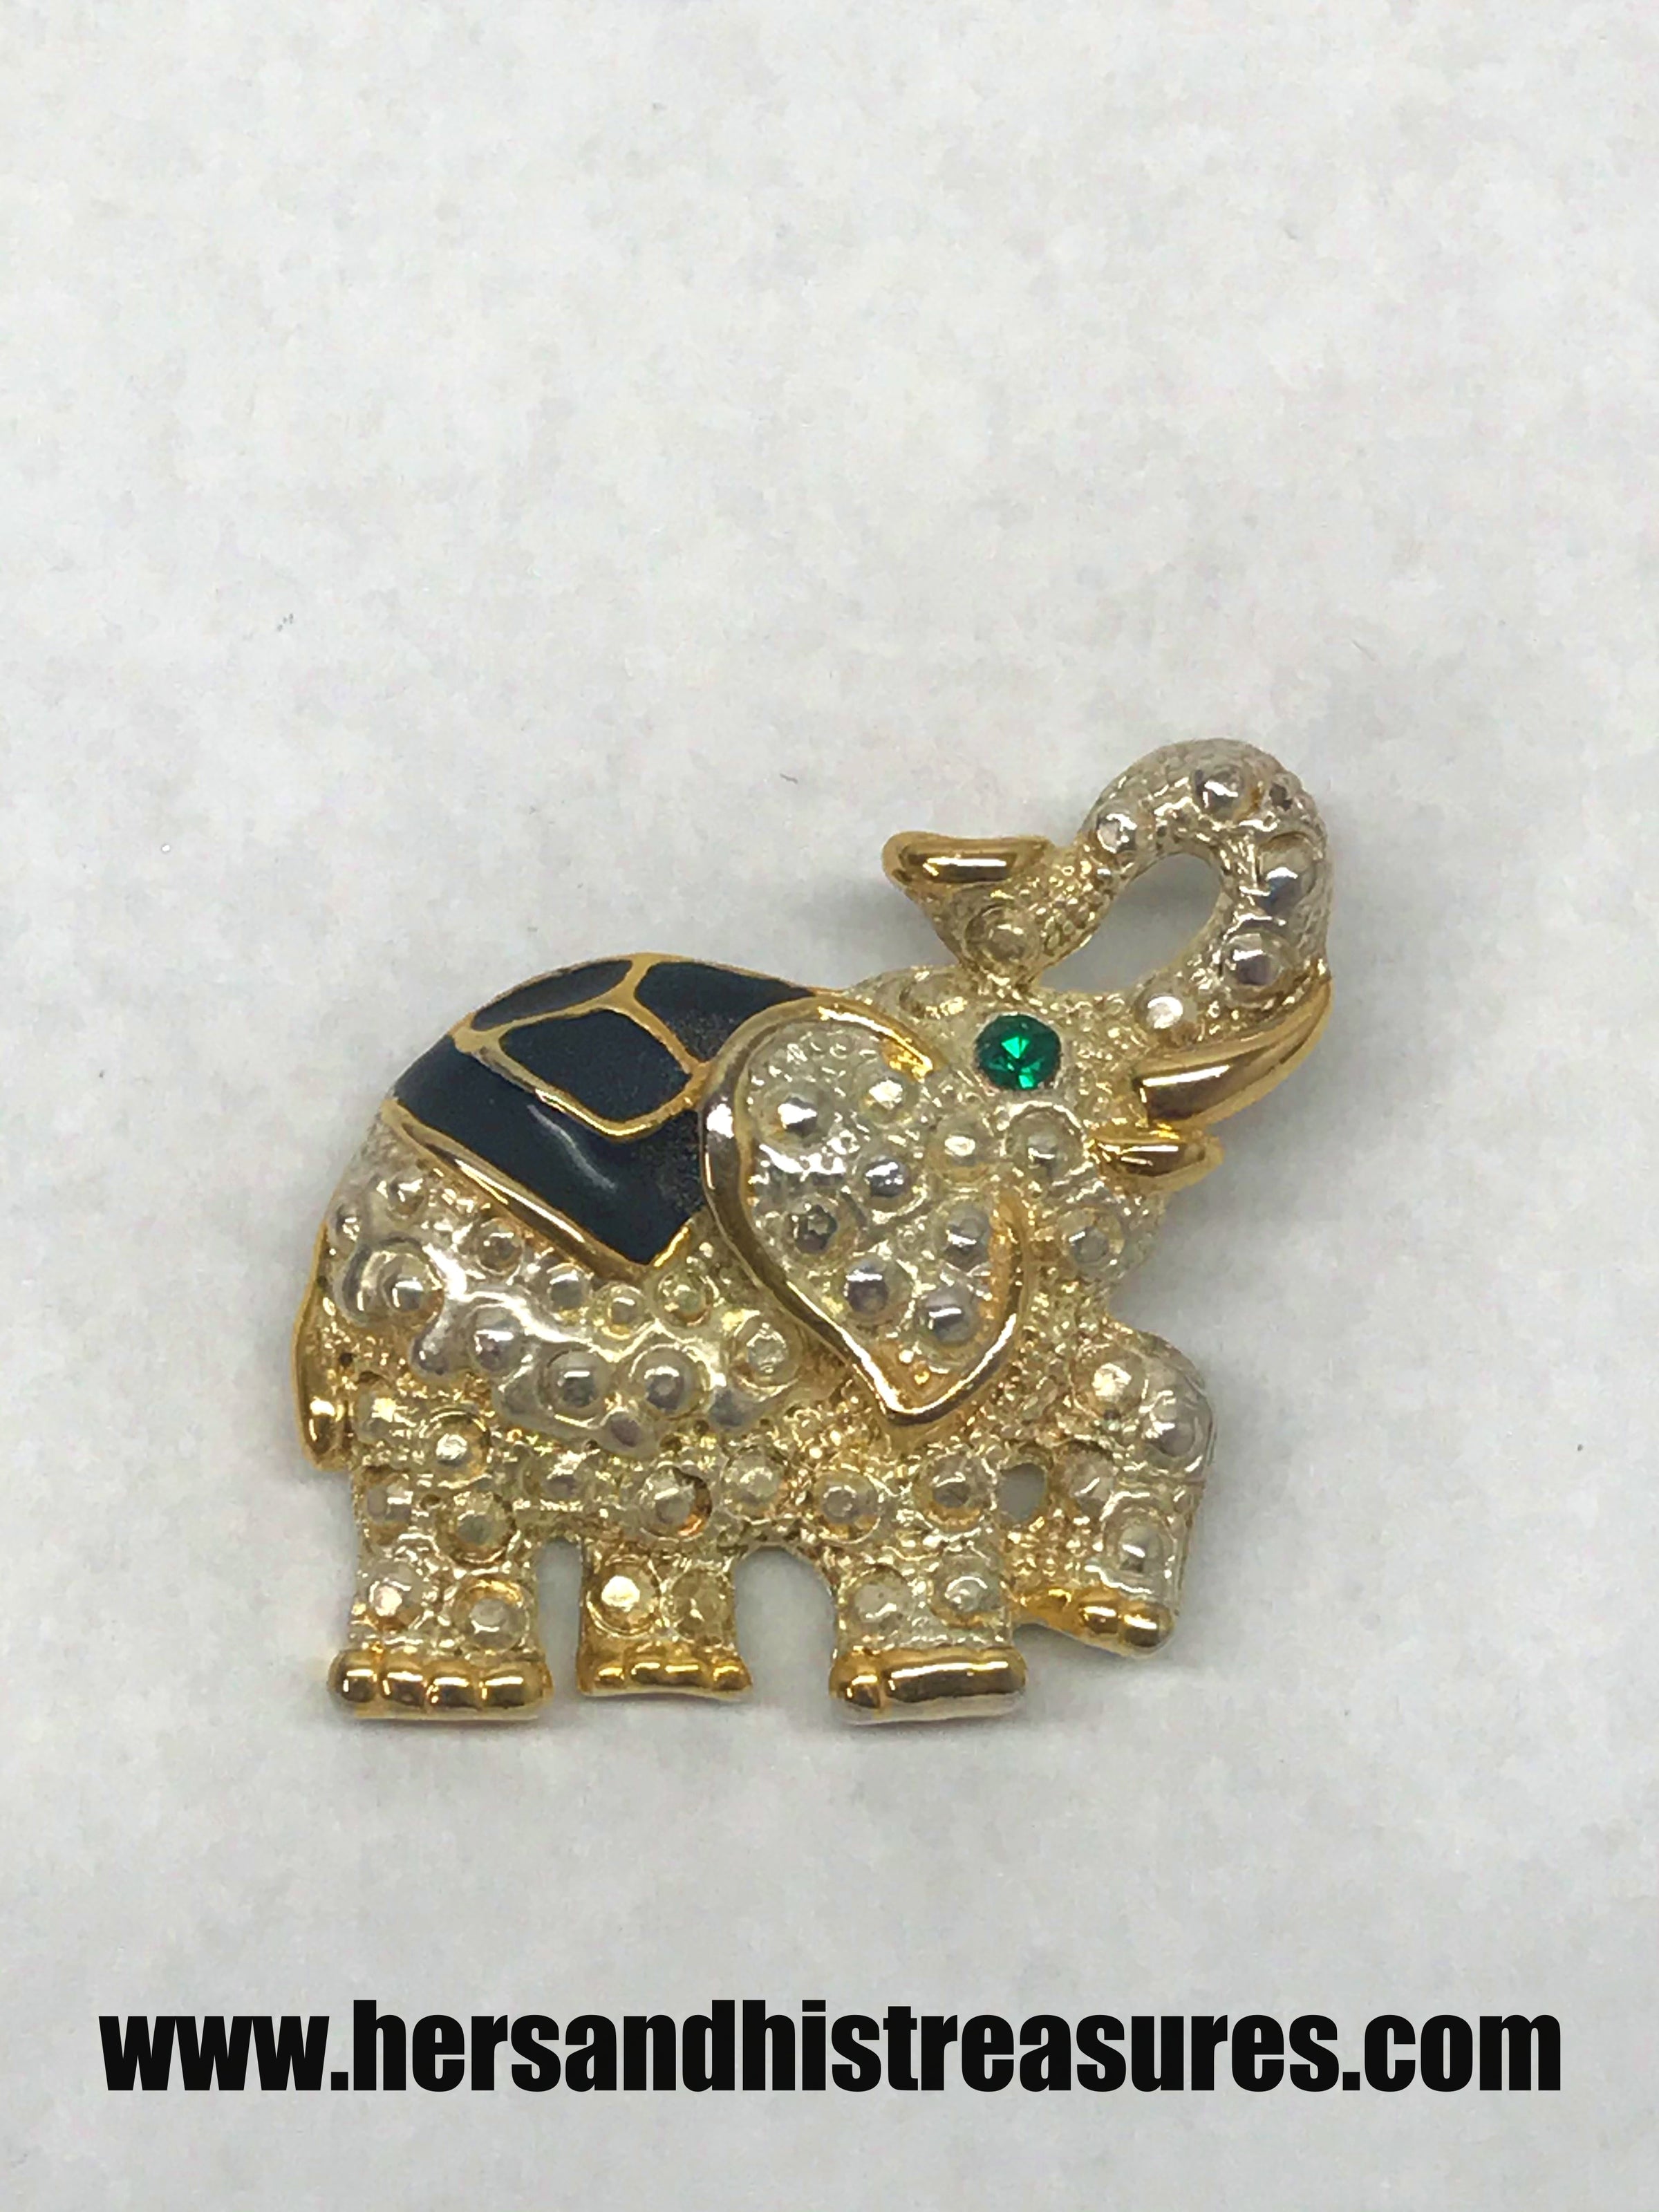 Gold and Silver Tone Elephant Brooch Pin With Green Rhinestone Eye